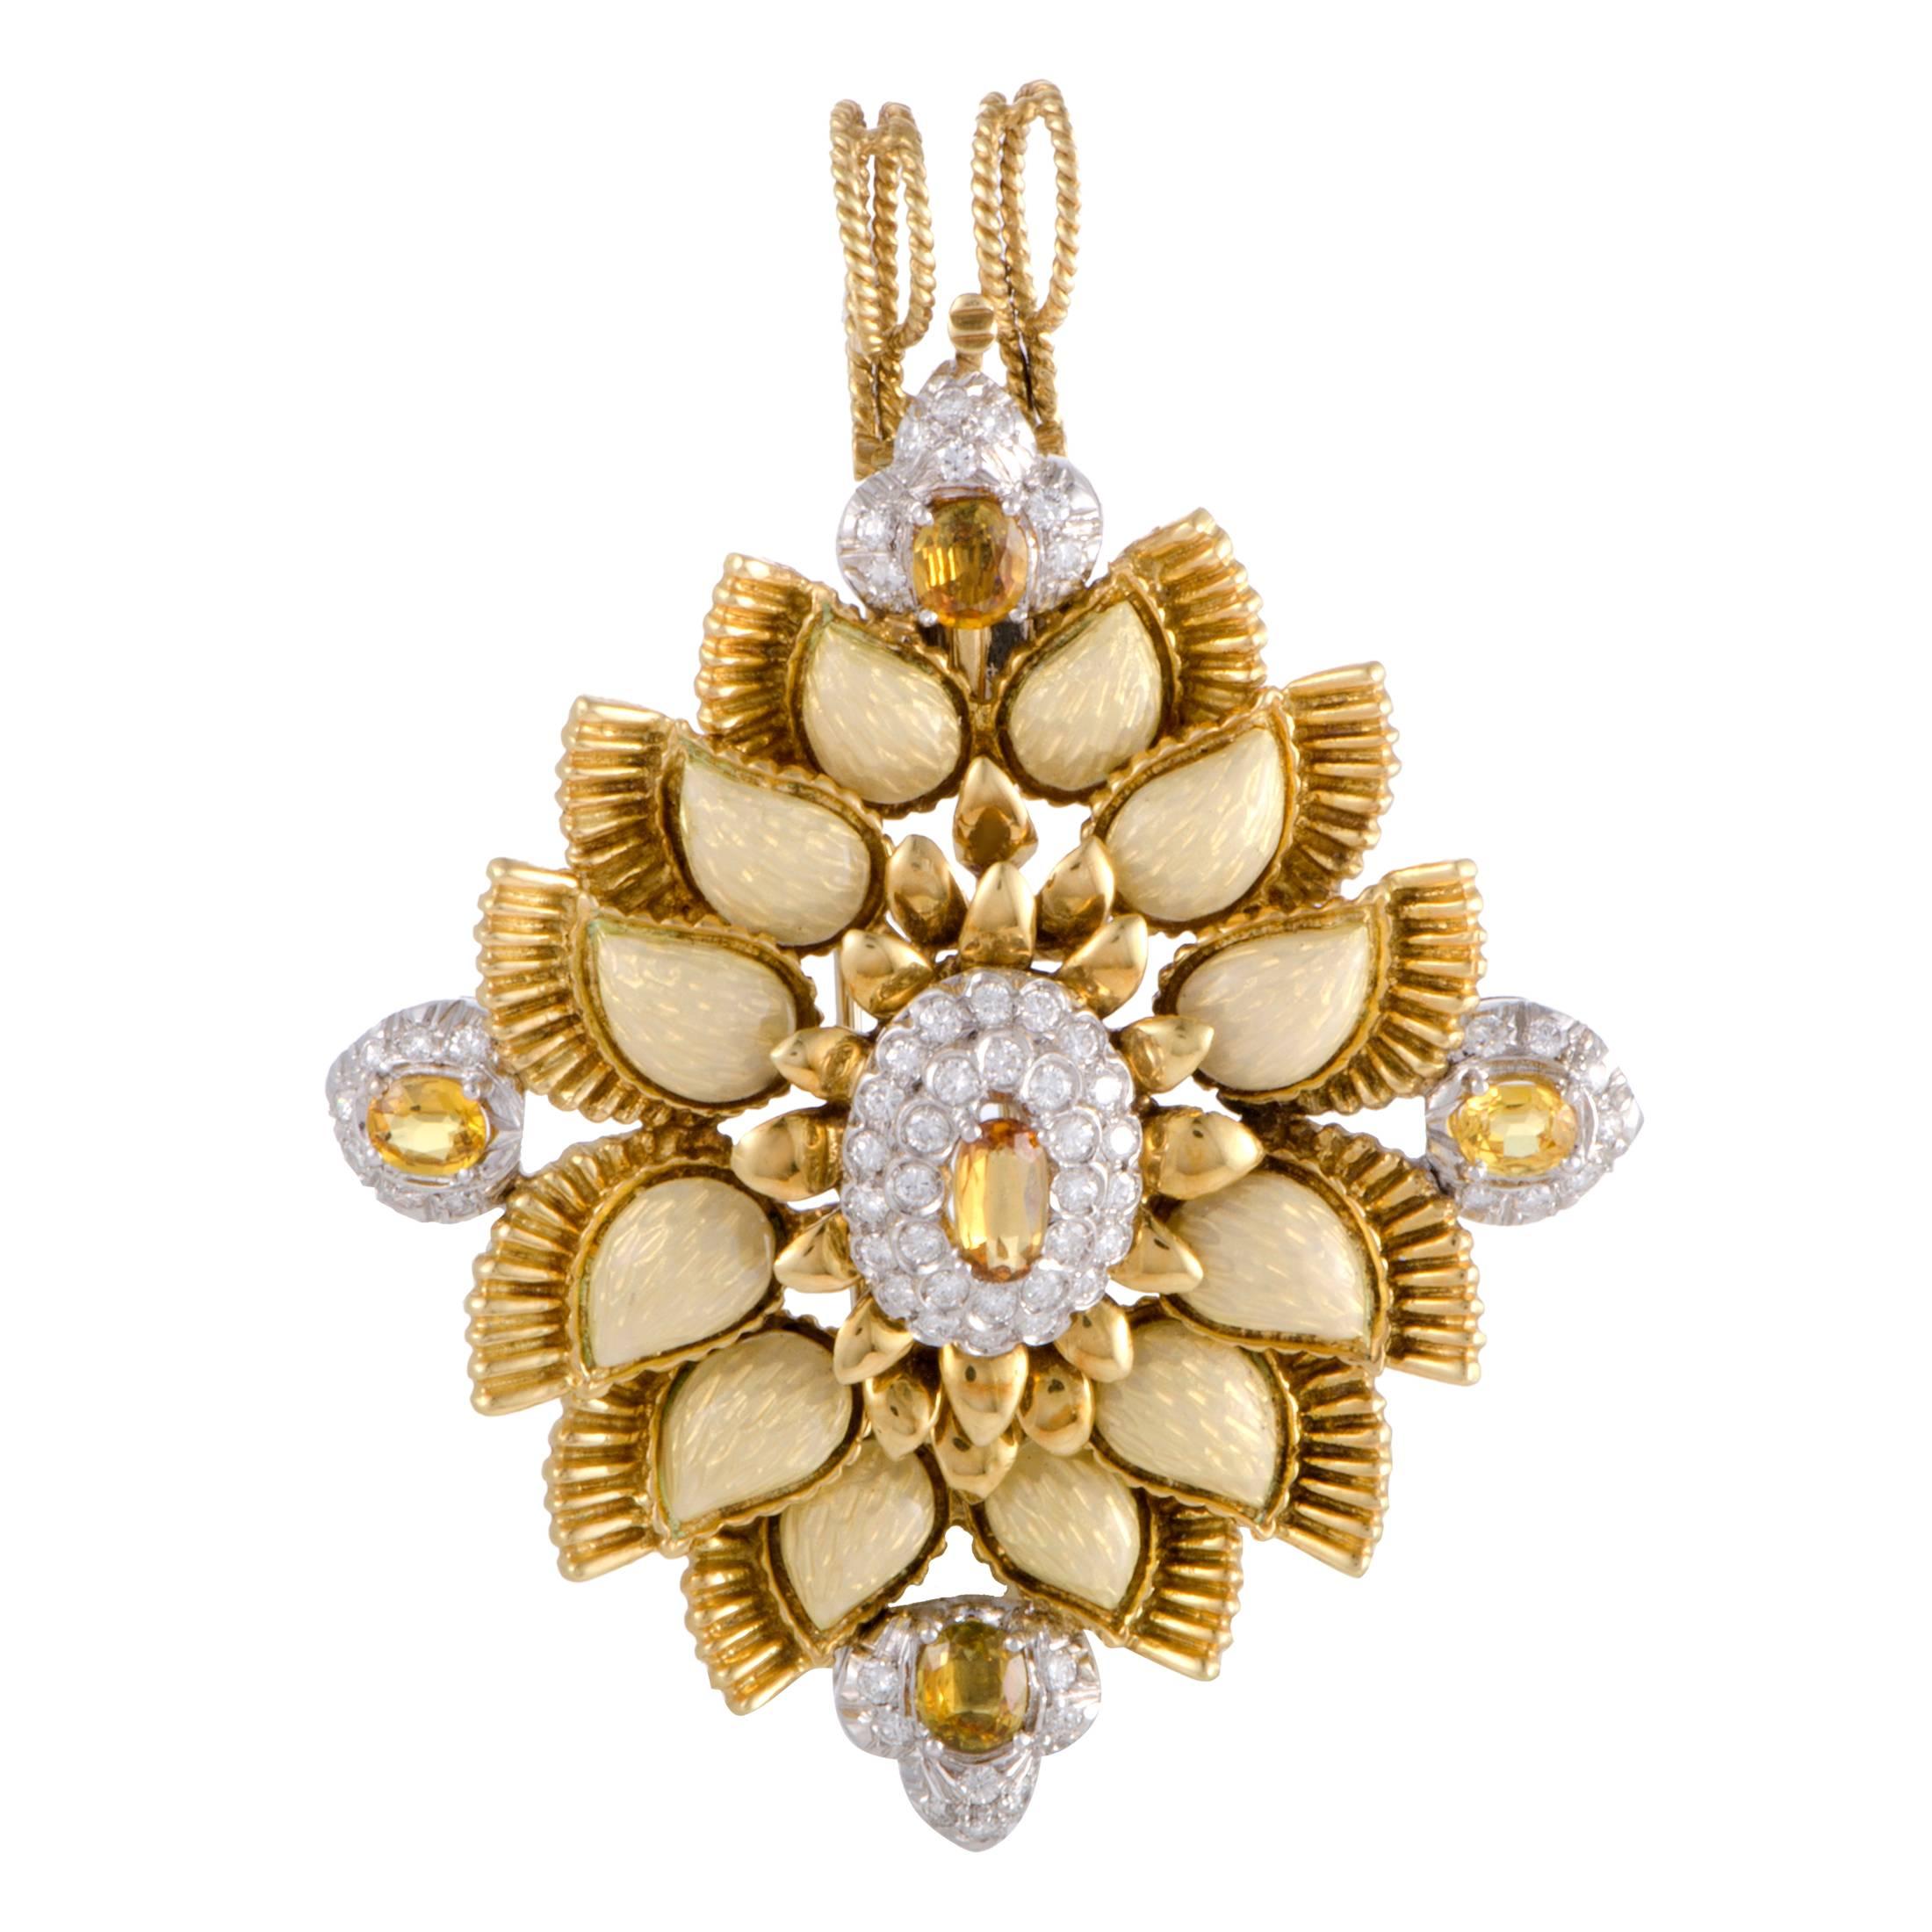 Cartier Diamond and Yellow Sapphire Enameled Gold Pendant or Brooch